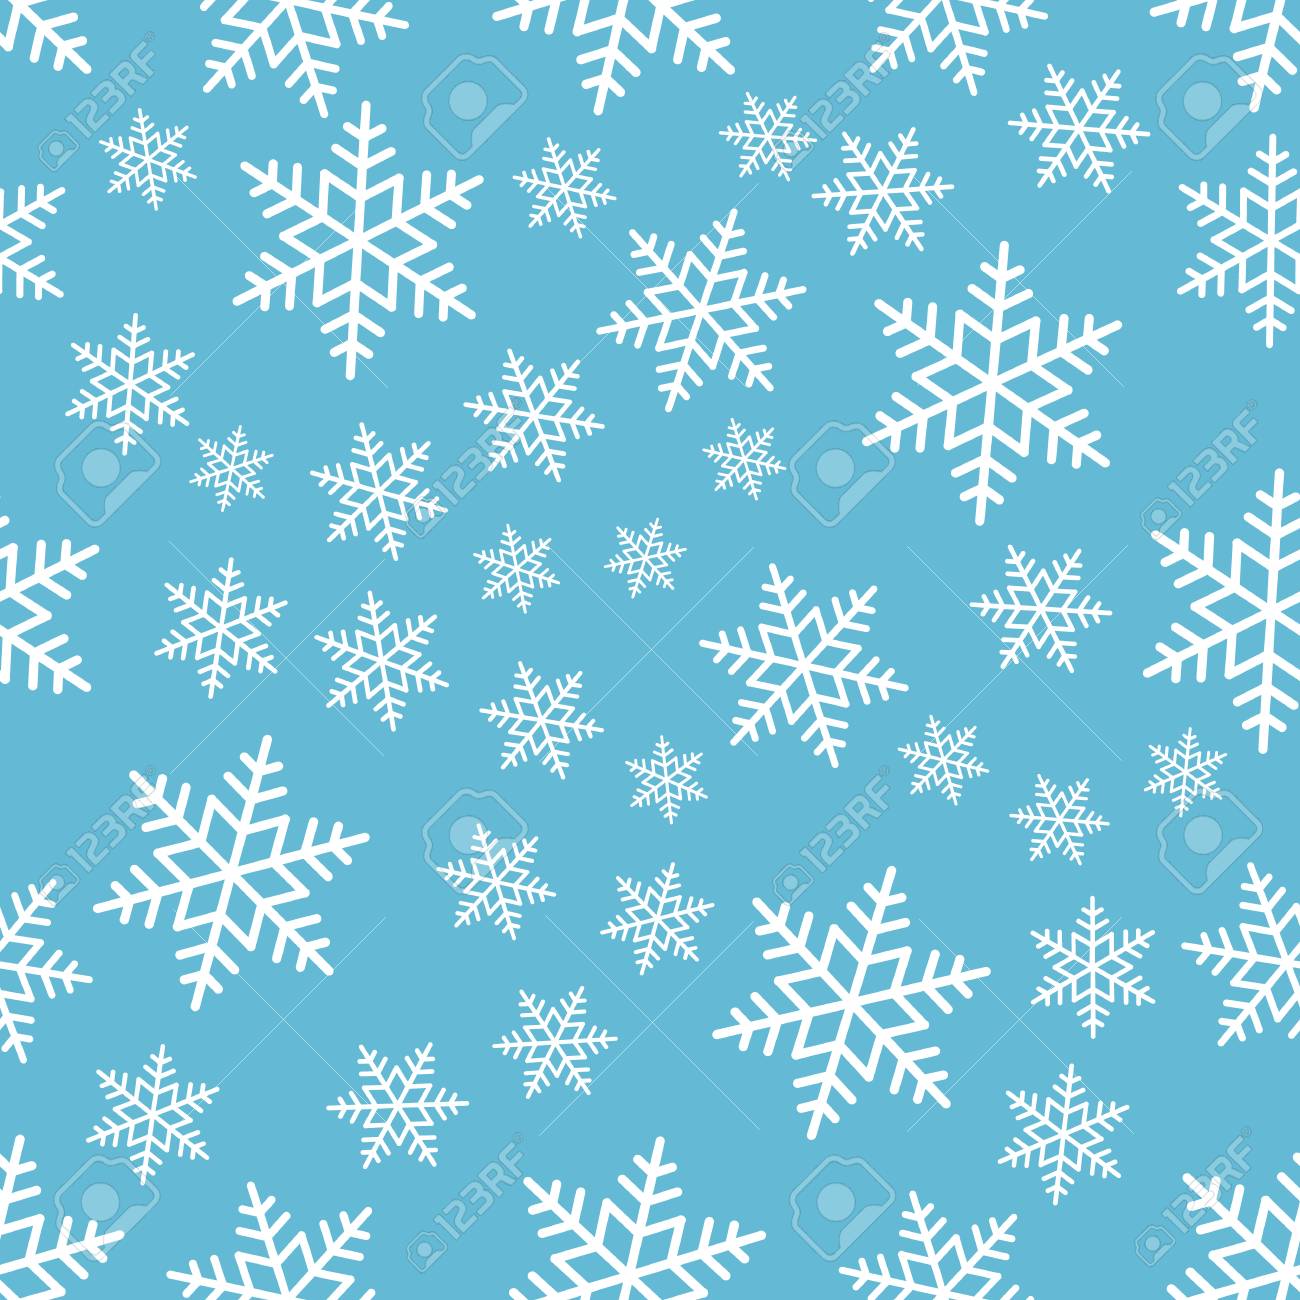 Snowflake Seamless Pattern Snow On Blue Background Abstract